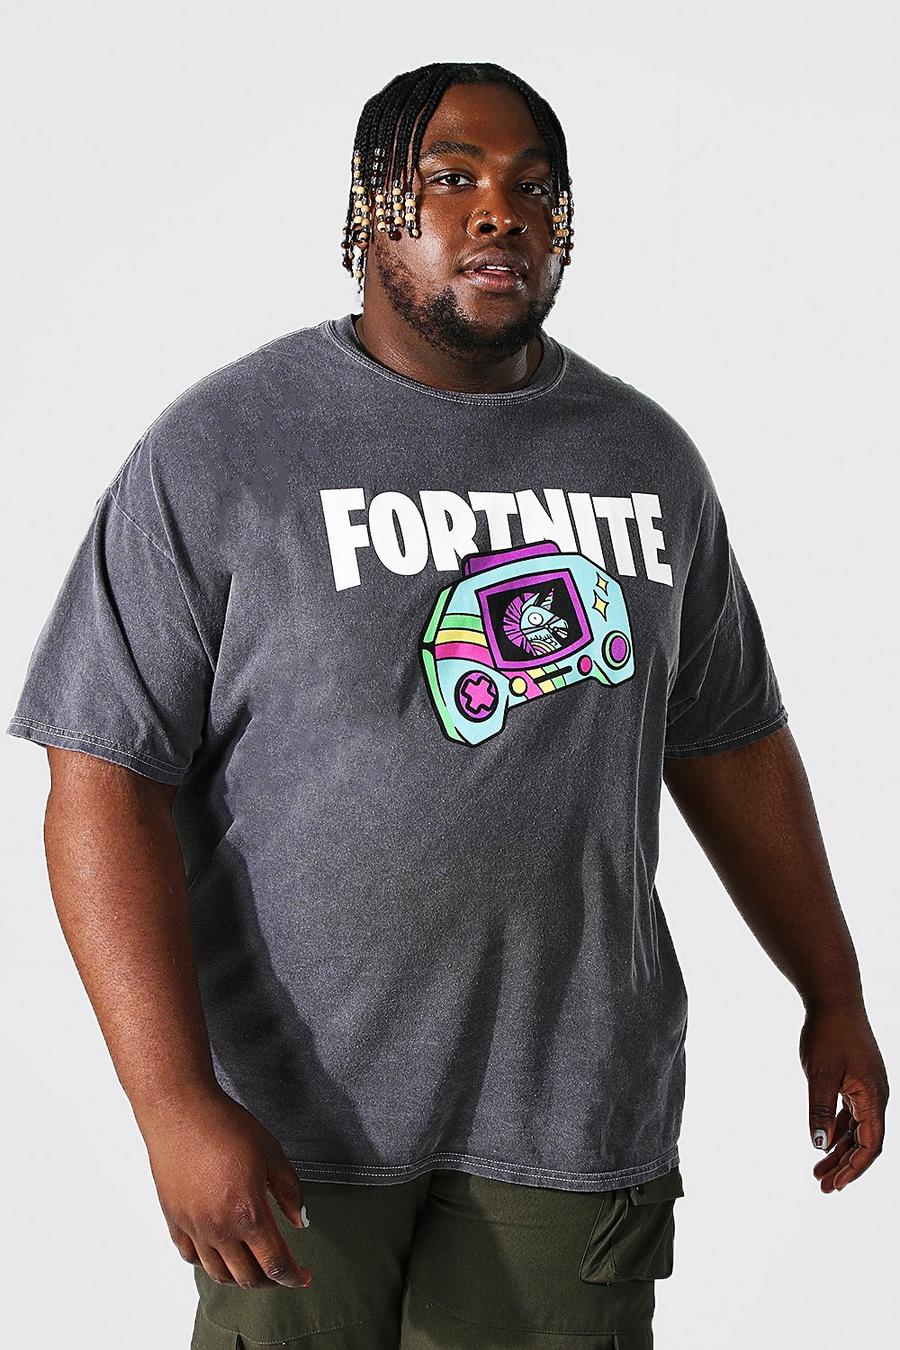 T-shirt Plus Size in lavaggio acido con stampa ufficiale Fortnite, Charcoal image number 1